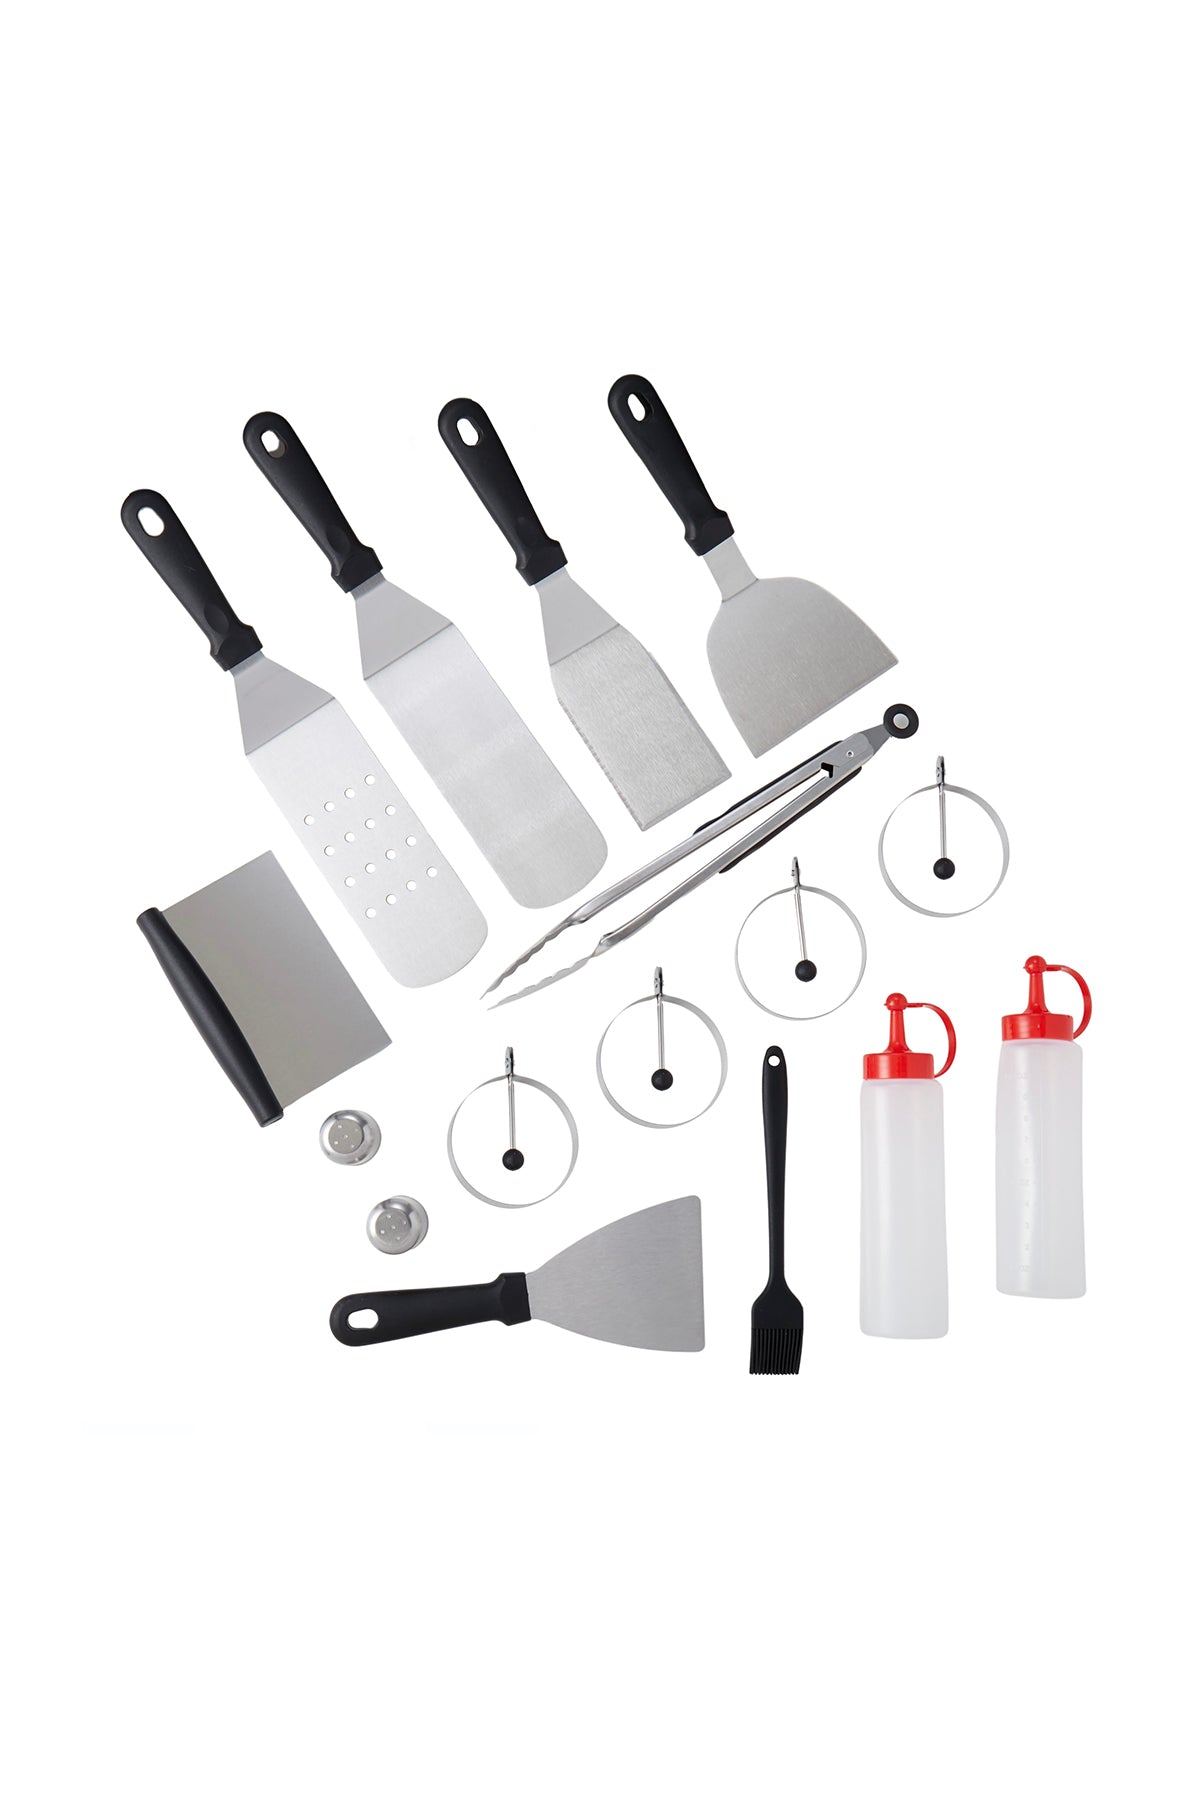 The Ultimate BBQ Tool Set